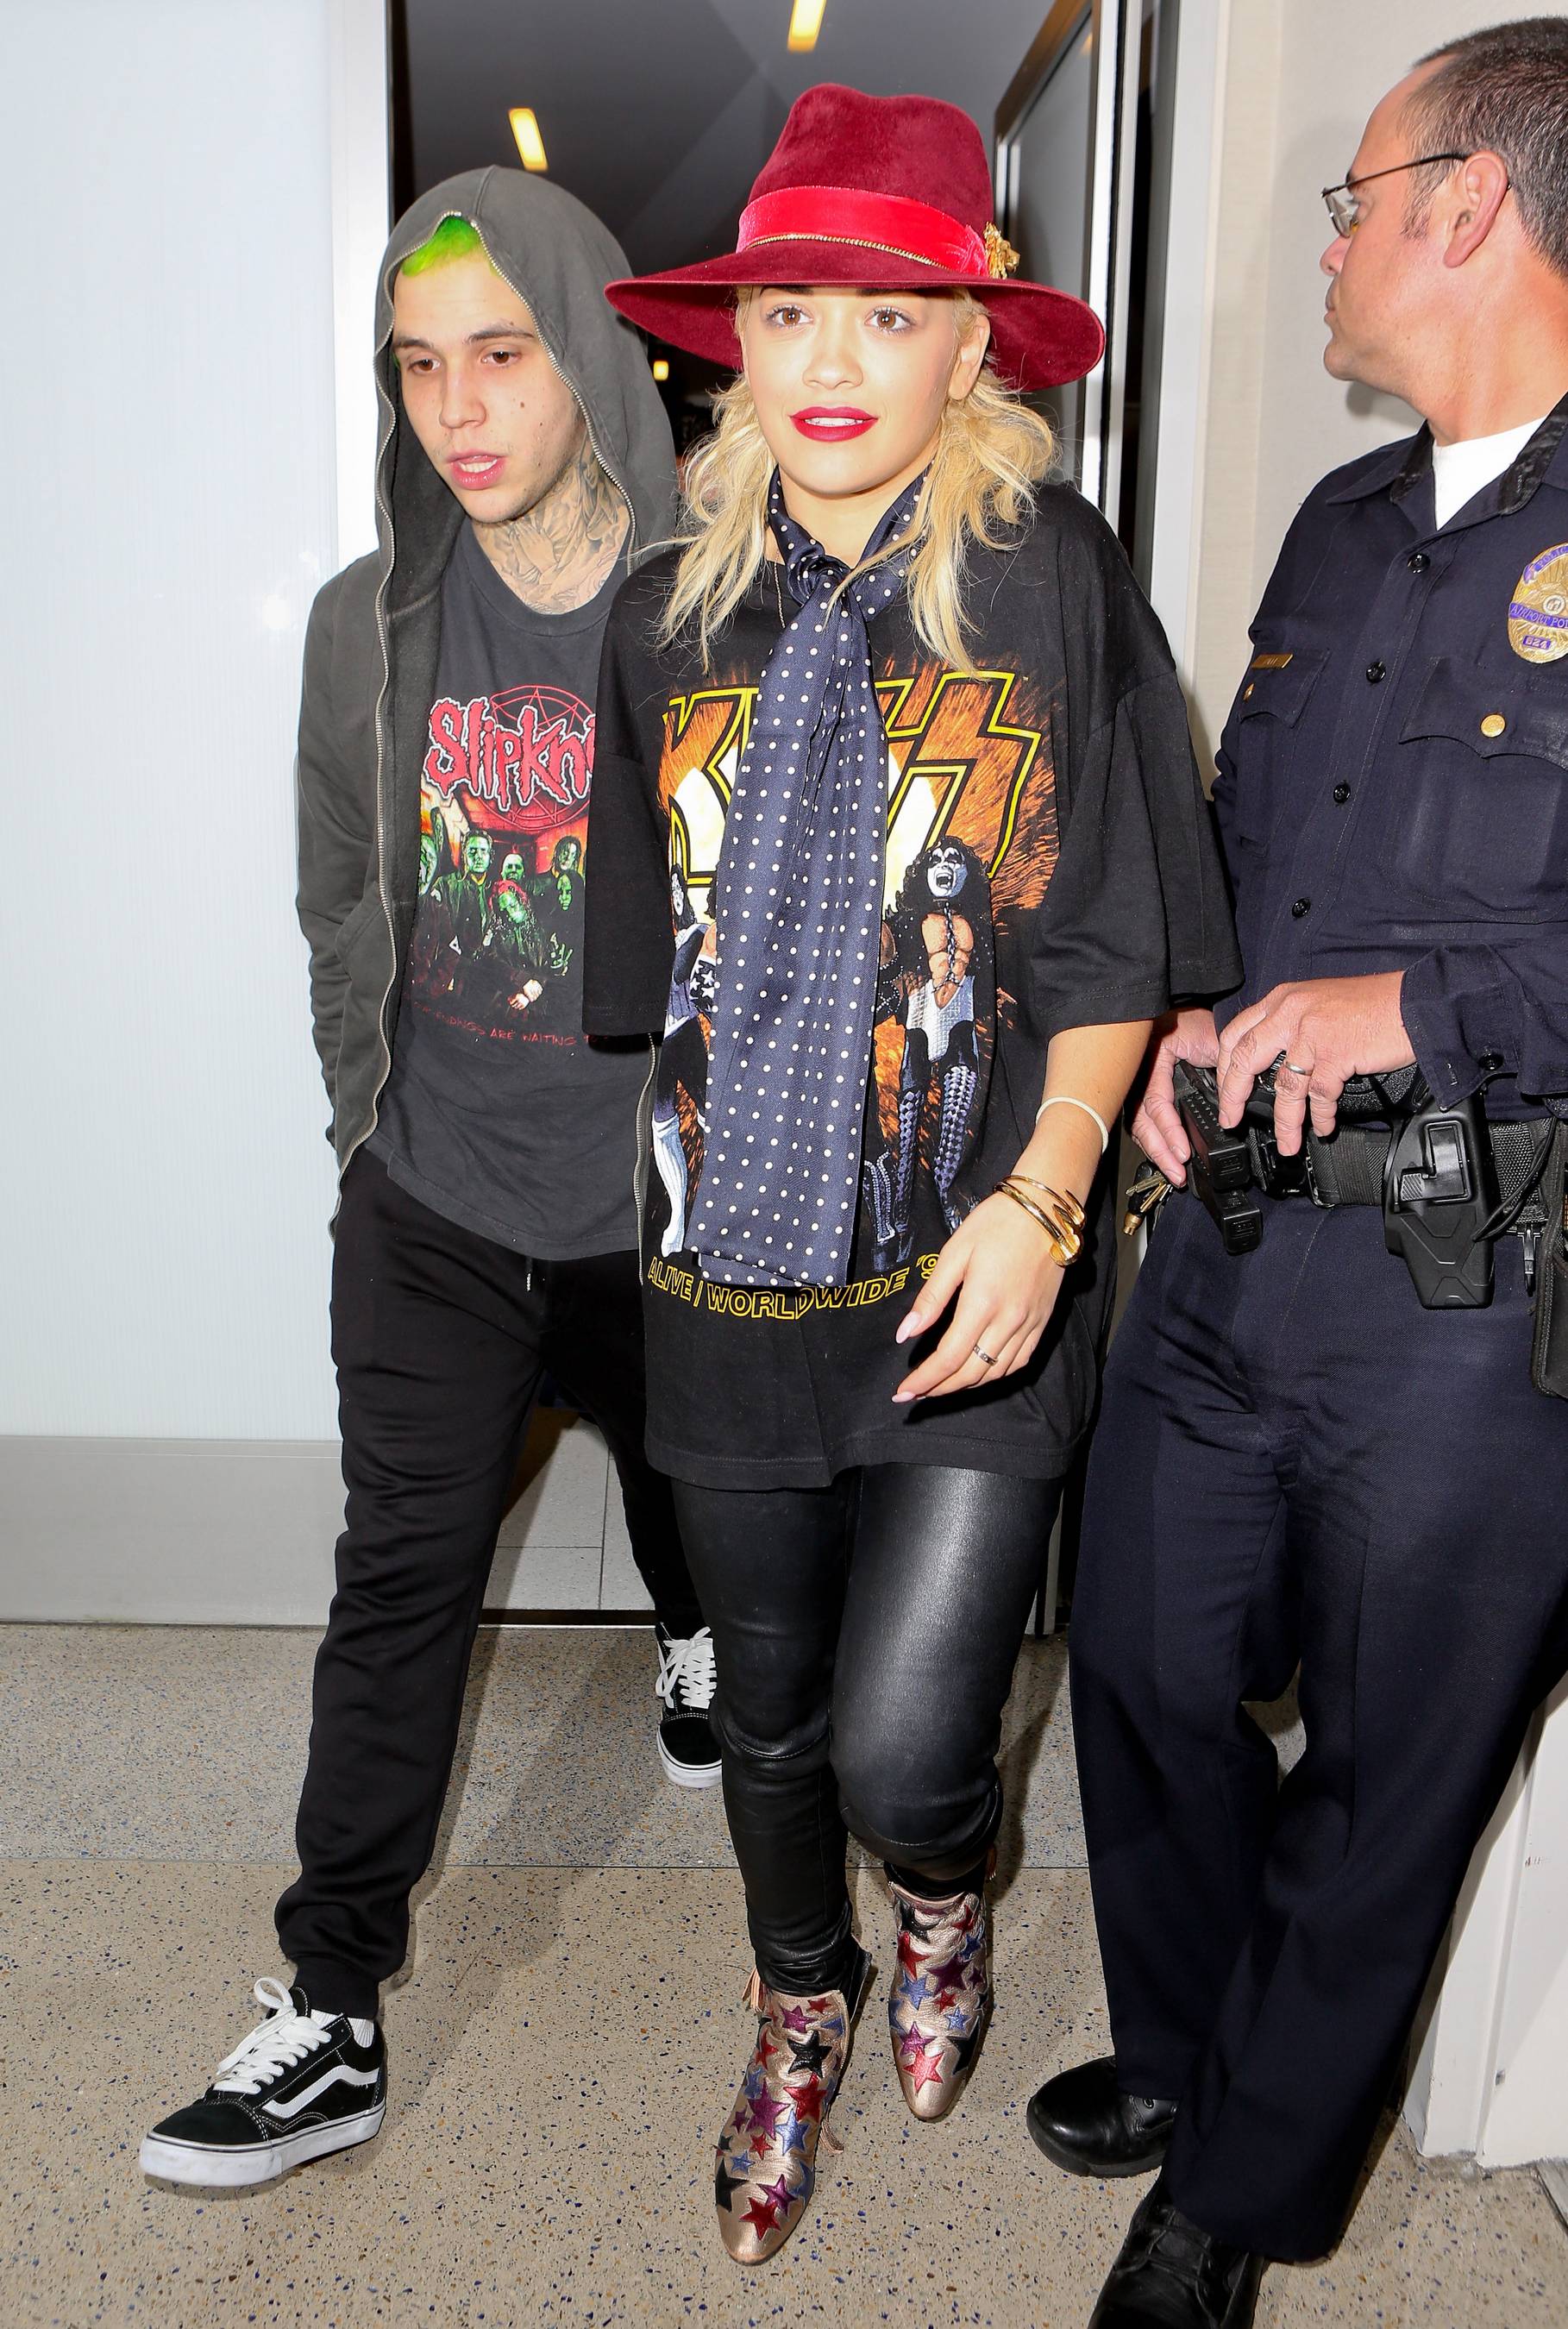 Rita Ora was spotted at LAX airport